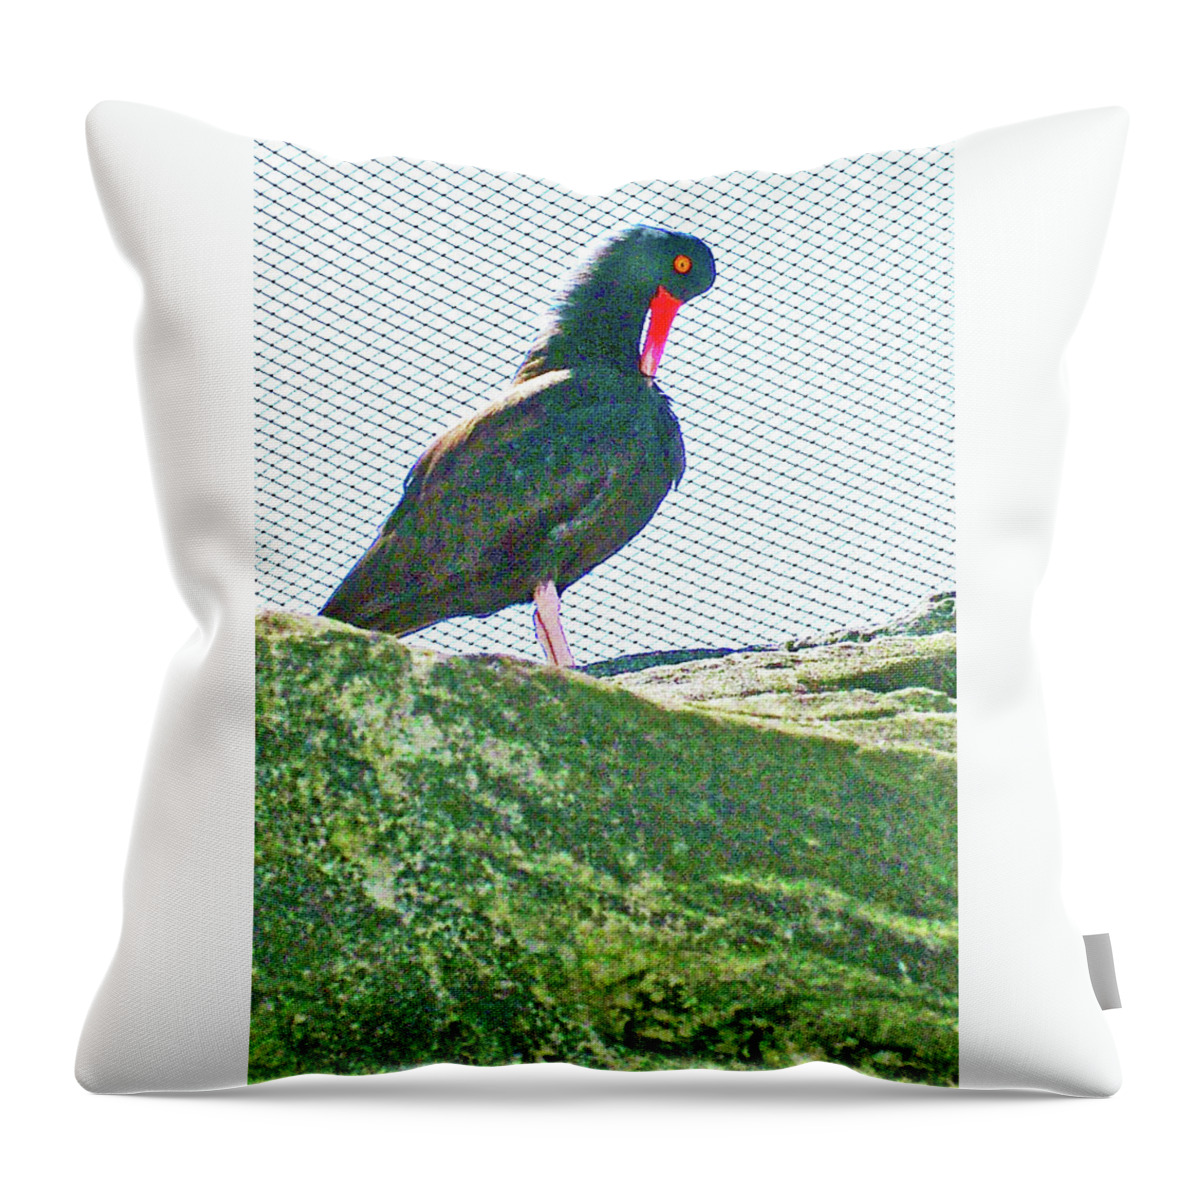 Black Oystercatcher In Oregon Coast Aquarium In Newport Throw Pillow featuring the photograph Black Oystercatcher in Oregon Coast Aquarium in Newport, Oregon by Ruth Hager